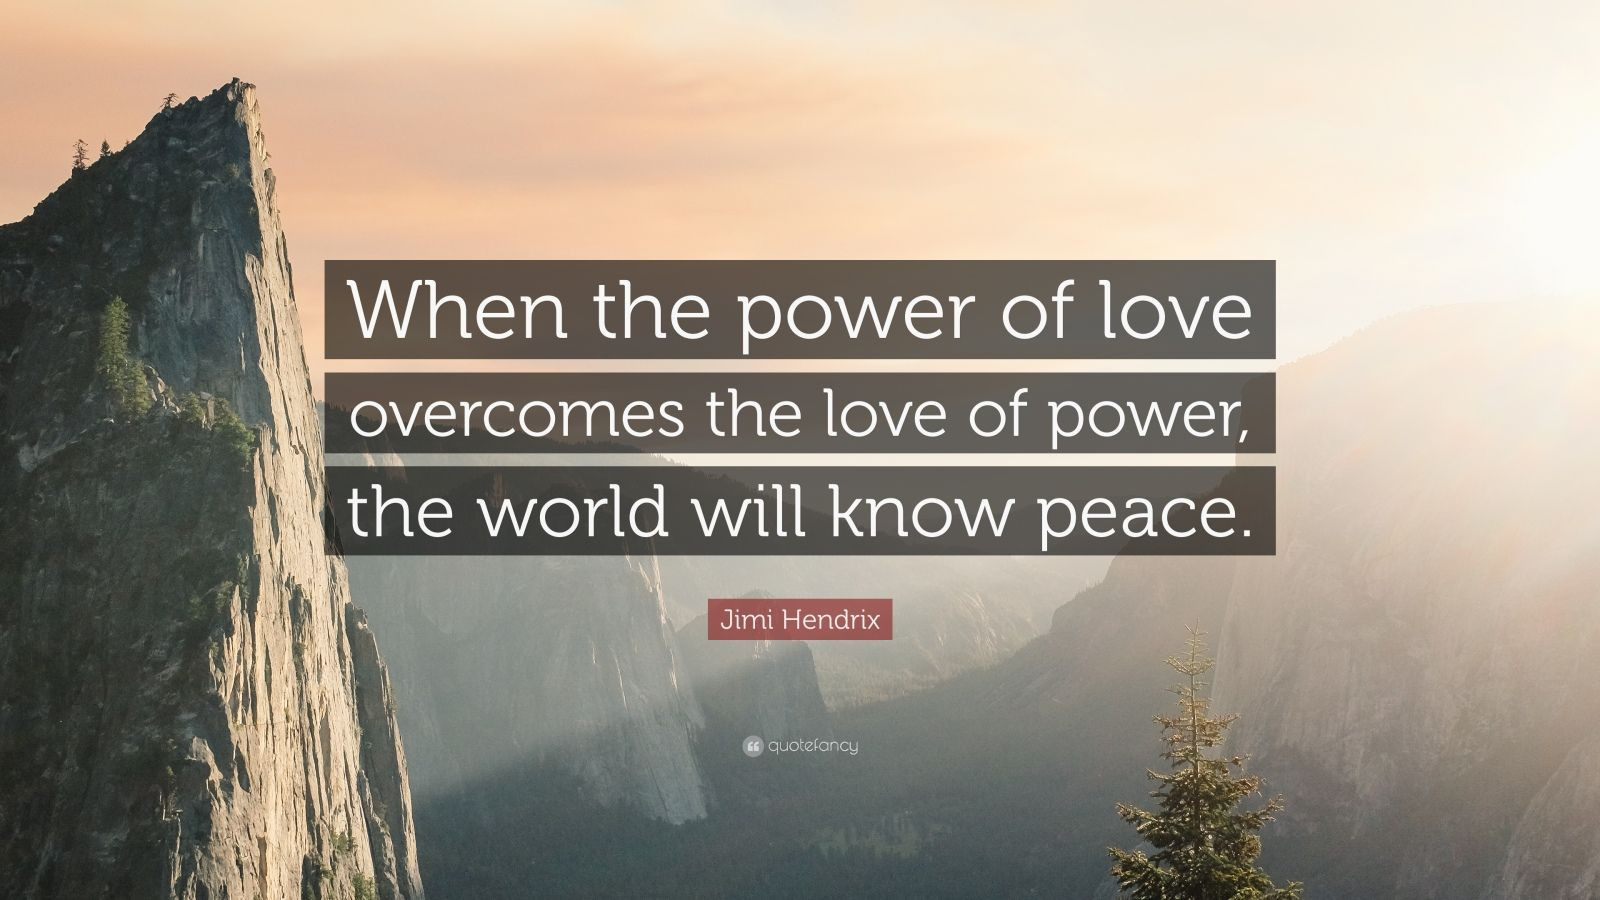 The Power Of Love Quote
 Jimi Hendrix Quote “When the power of love over es the